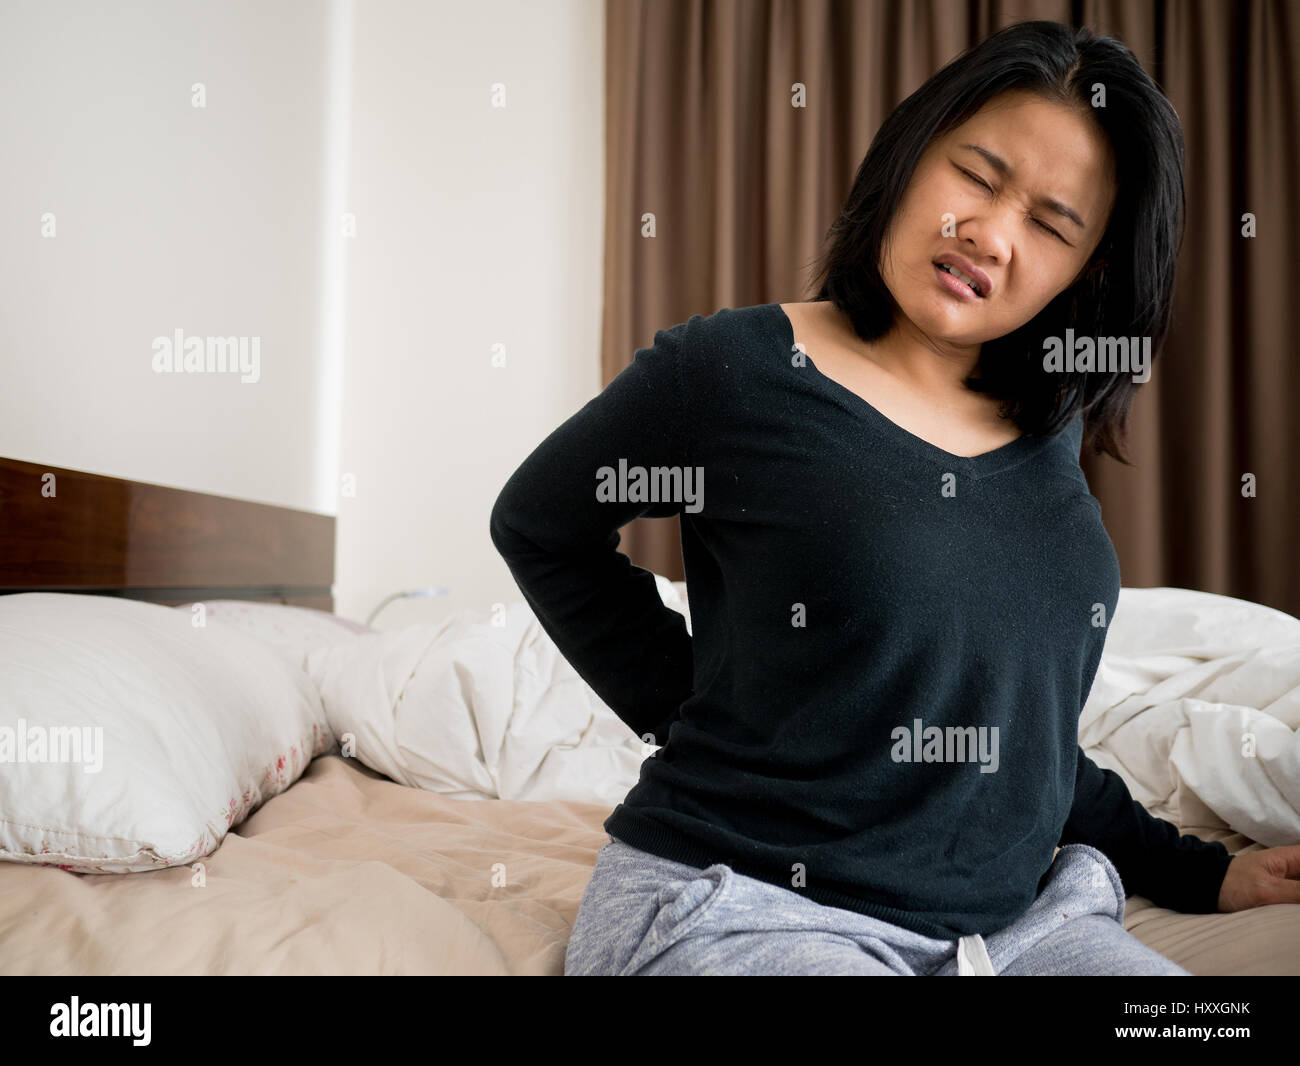 asian woman suffering from back pain sitting on bed Stock Photo